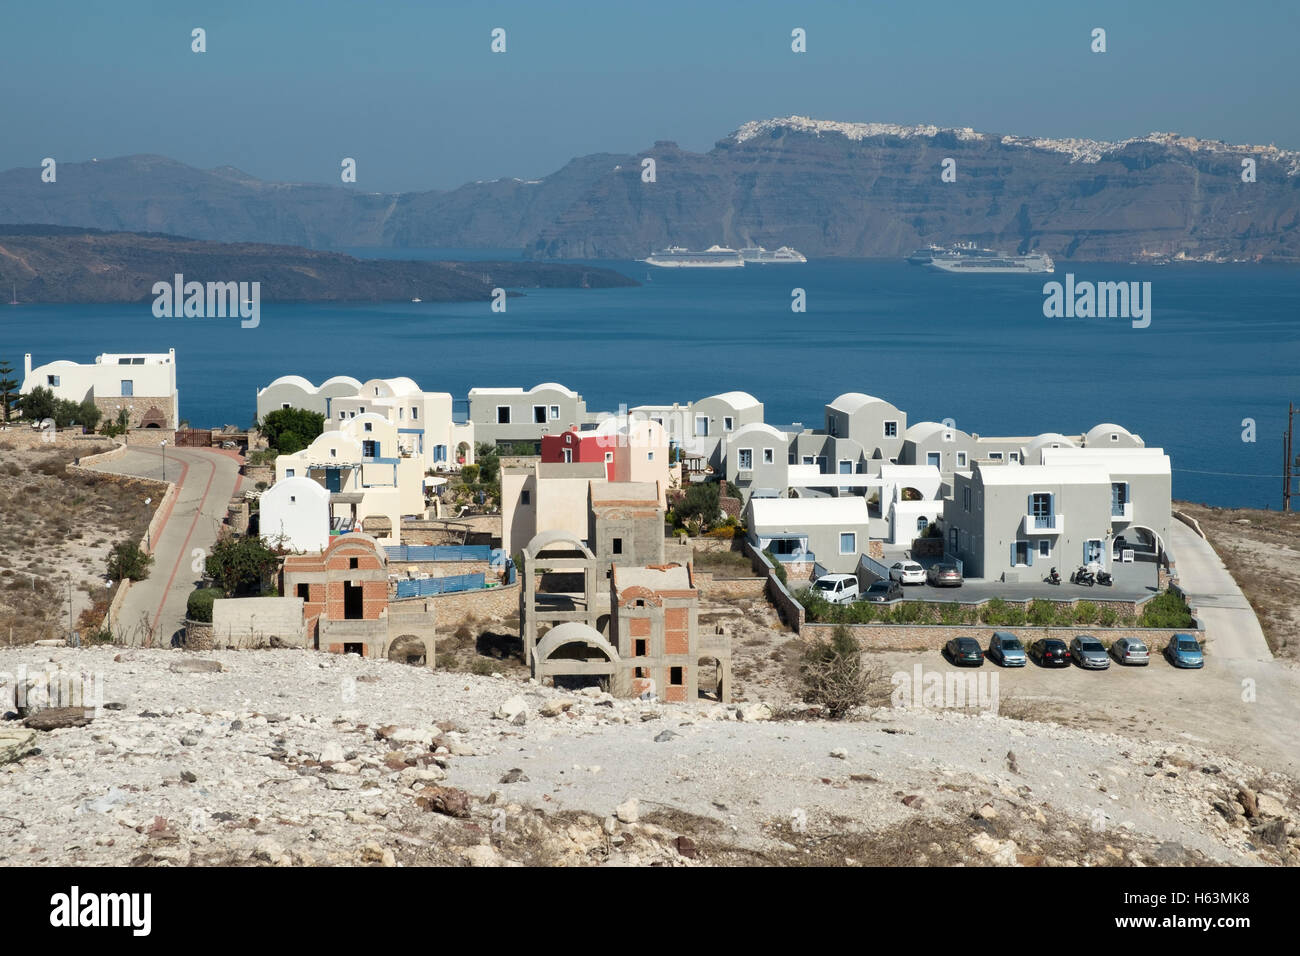 New houses under construction at Akrotiri on the island of Santorini, Greece with the caldera and Thira in the background. Stock Photo